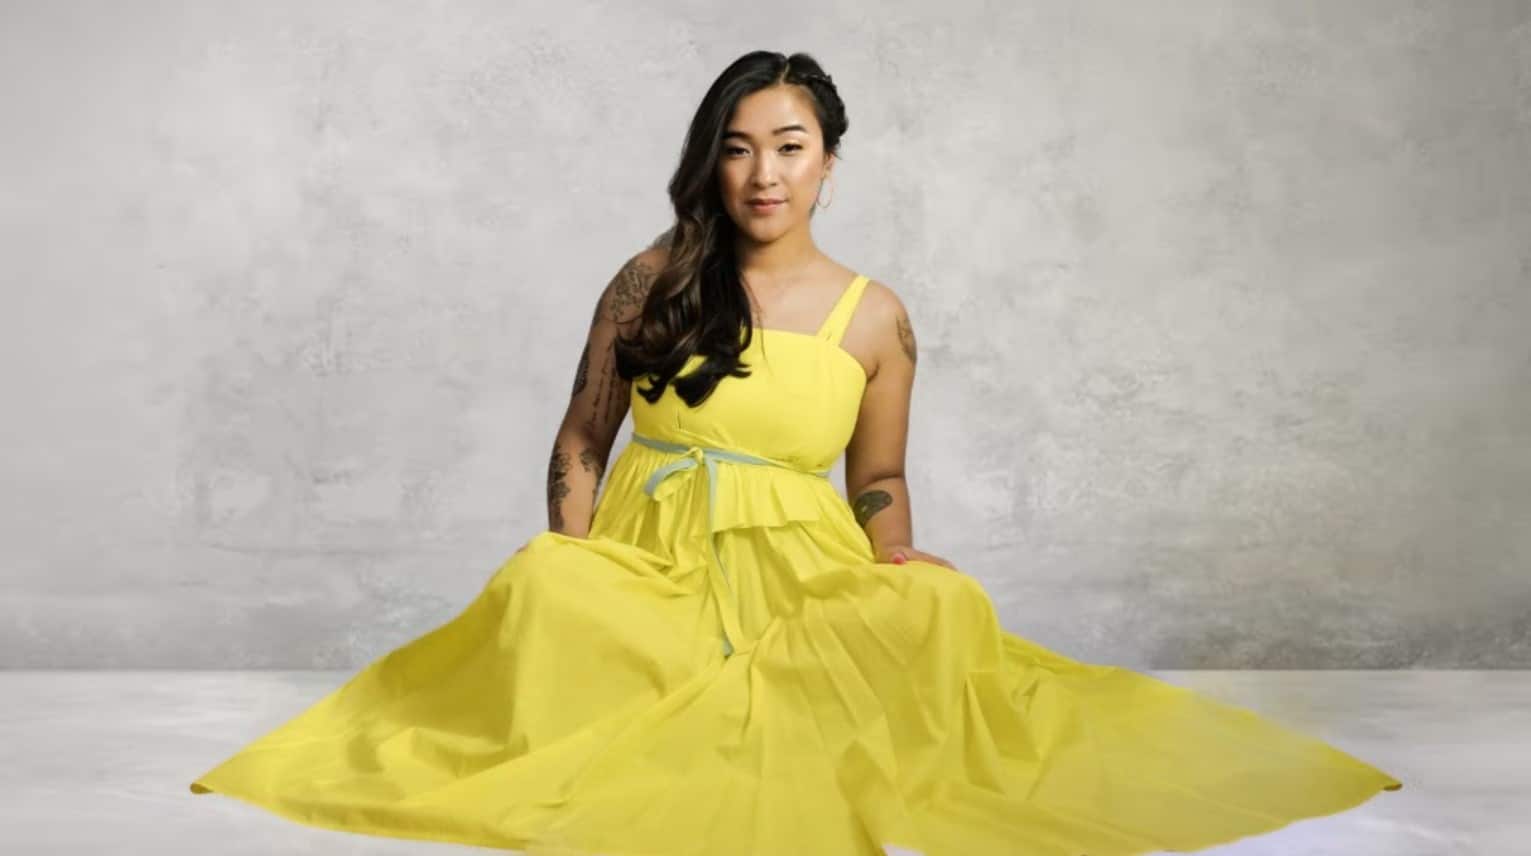 Liz sits in a yellow gown.